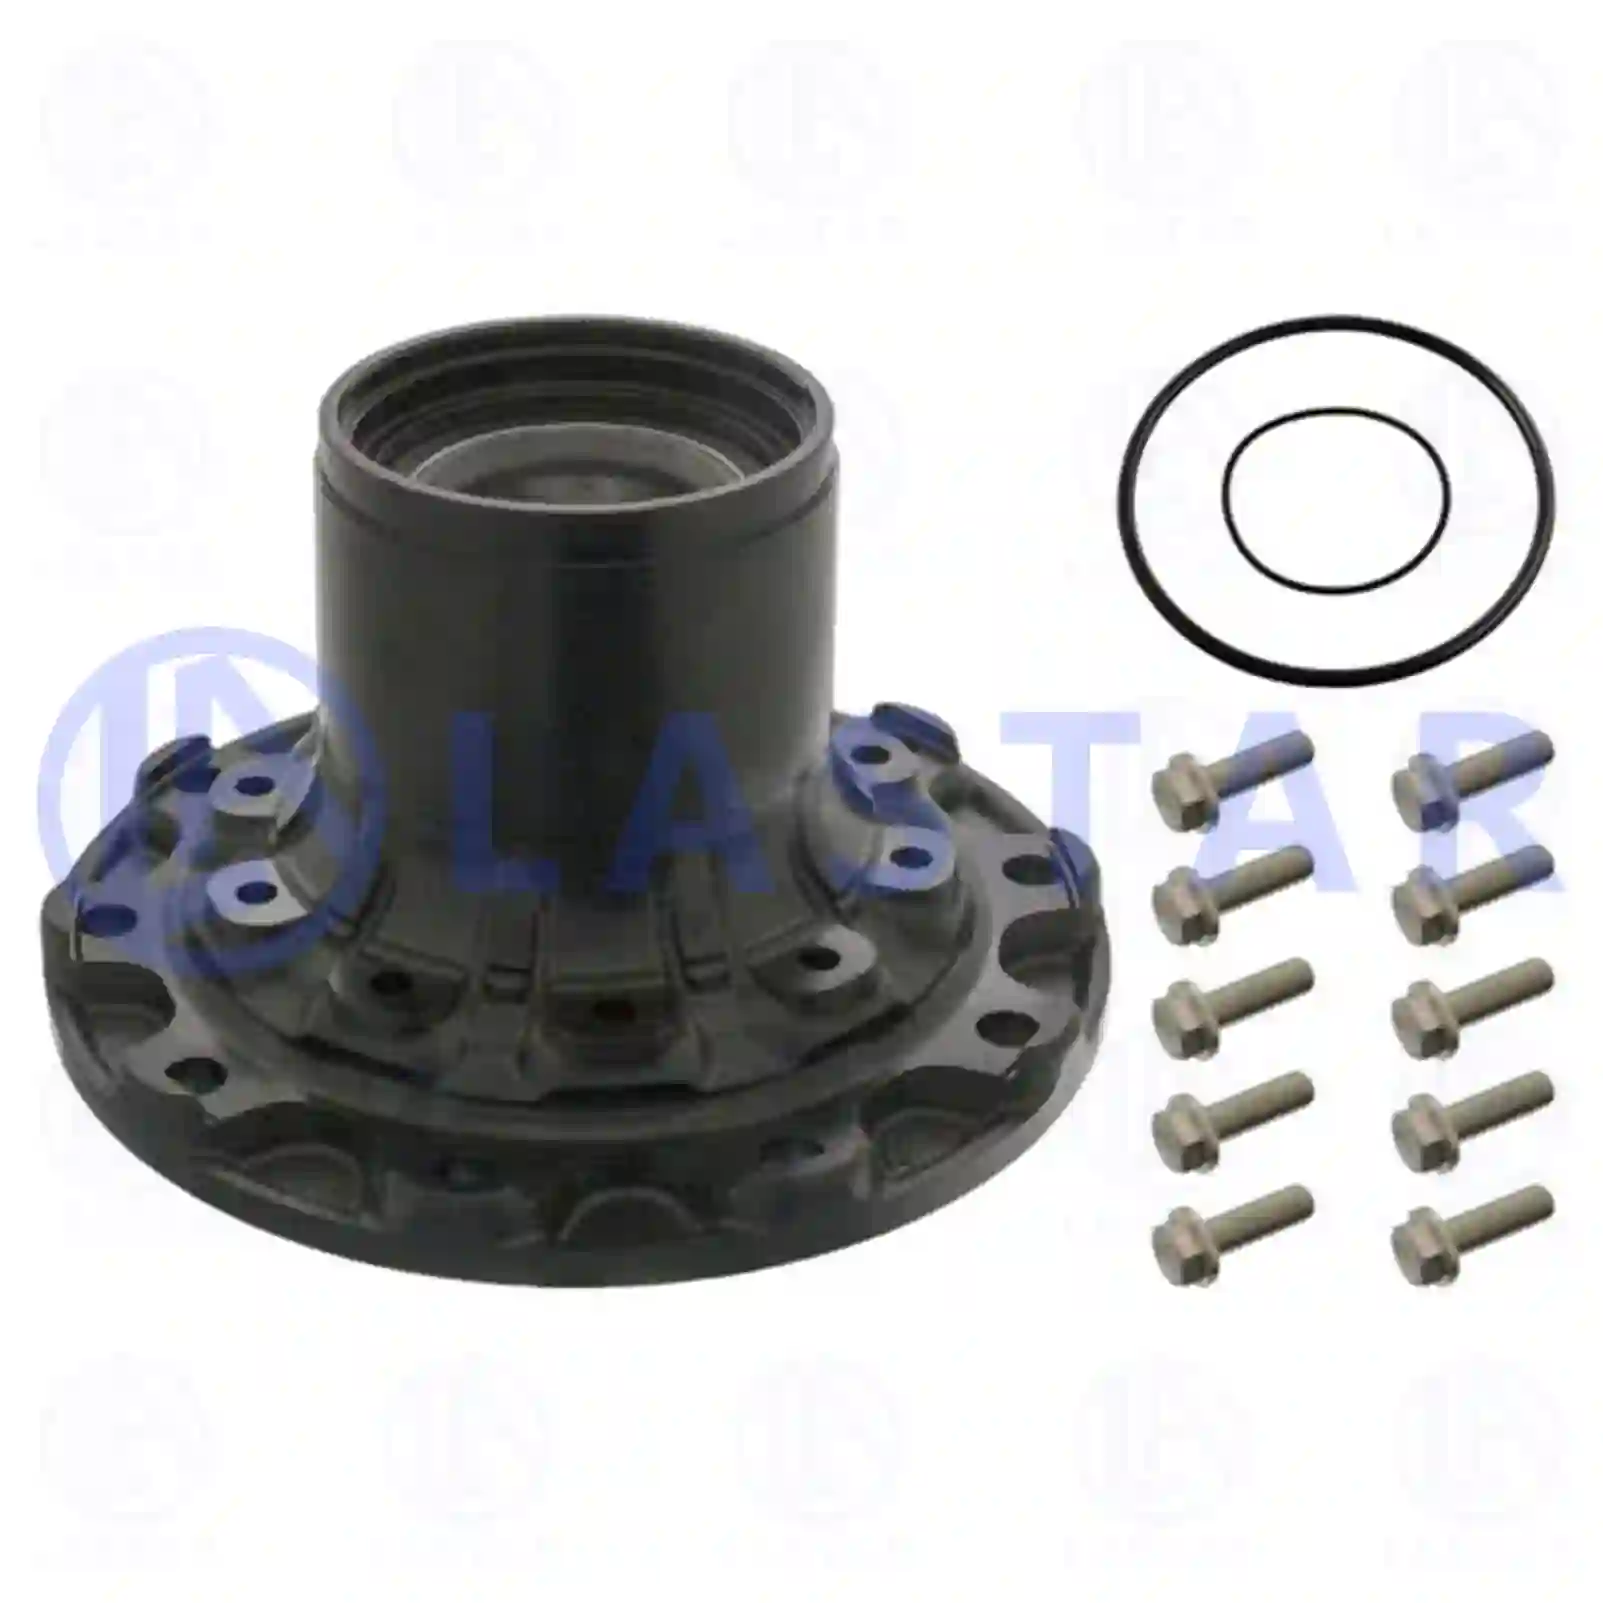 Wheel hub, without bearings, 77726321, JAE0250302801S, 0003500535S, 9463560501, , , , ||  77726321 Lastar Spare Part | Truck Spare Parts, Auotomotive Spare Parts Wheel hub, without bearings, 77726321, JAE0250302801S, 0003500535S, 9463560501, , , , ||  77726321 Lastar Spare Part | Truck Spare Parts, Auotomotive Spare Parts